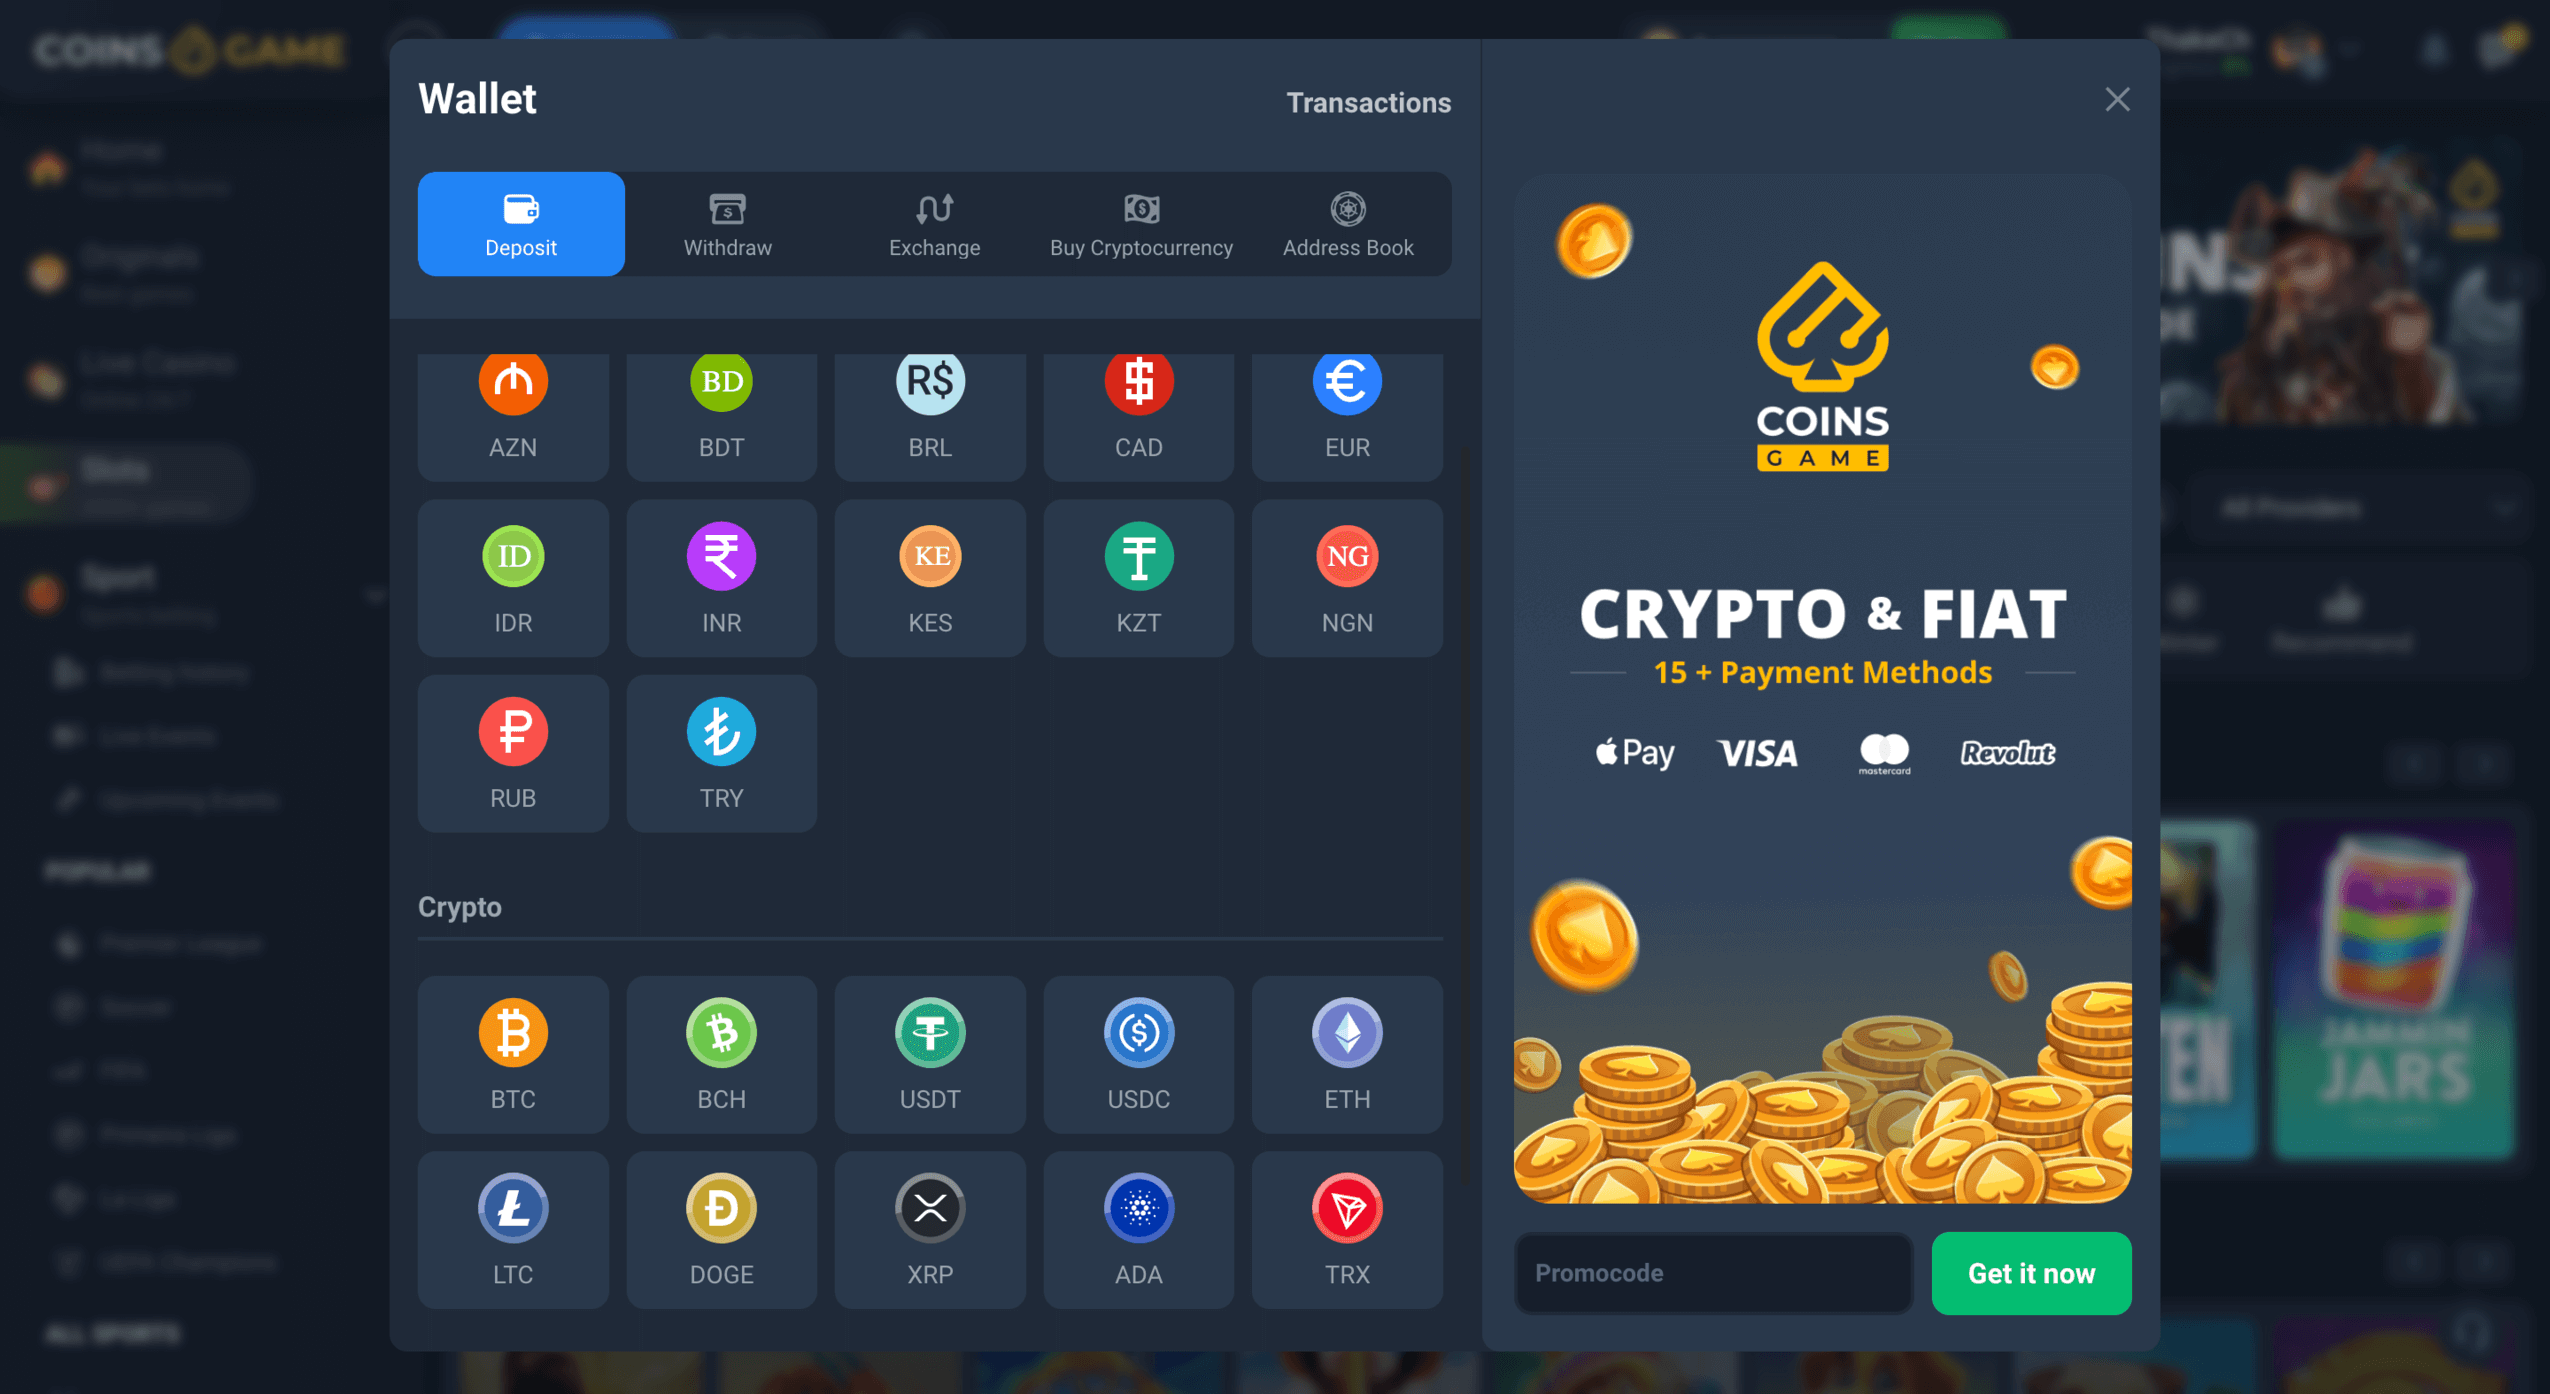 Coins.Game Casino Accepted Cryptocurrencies Fiat Money